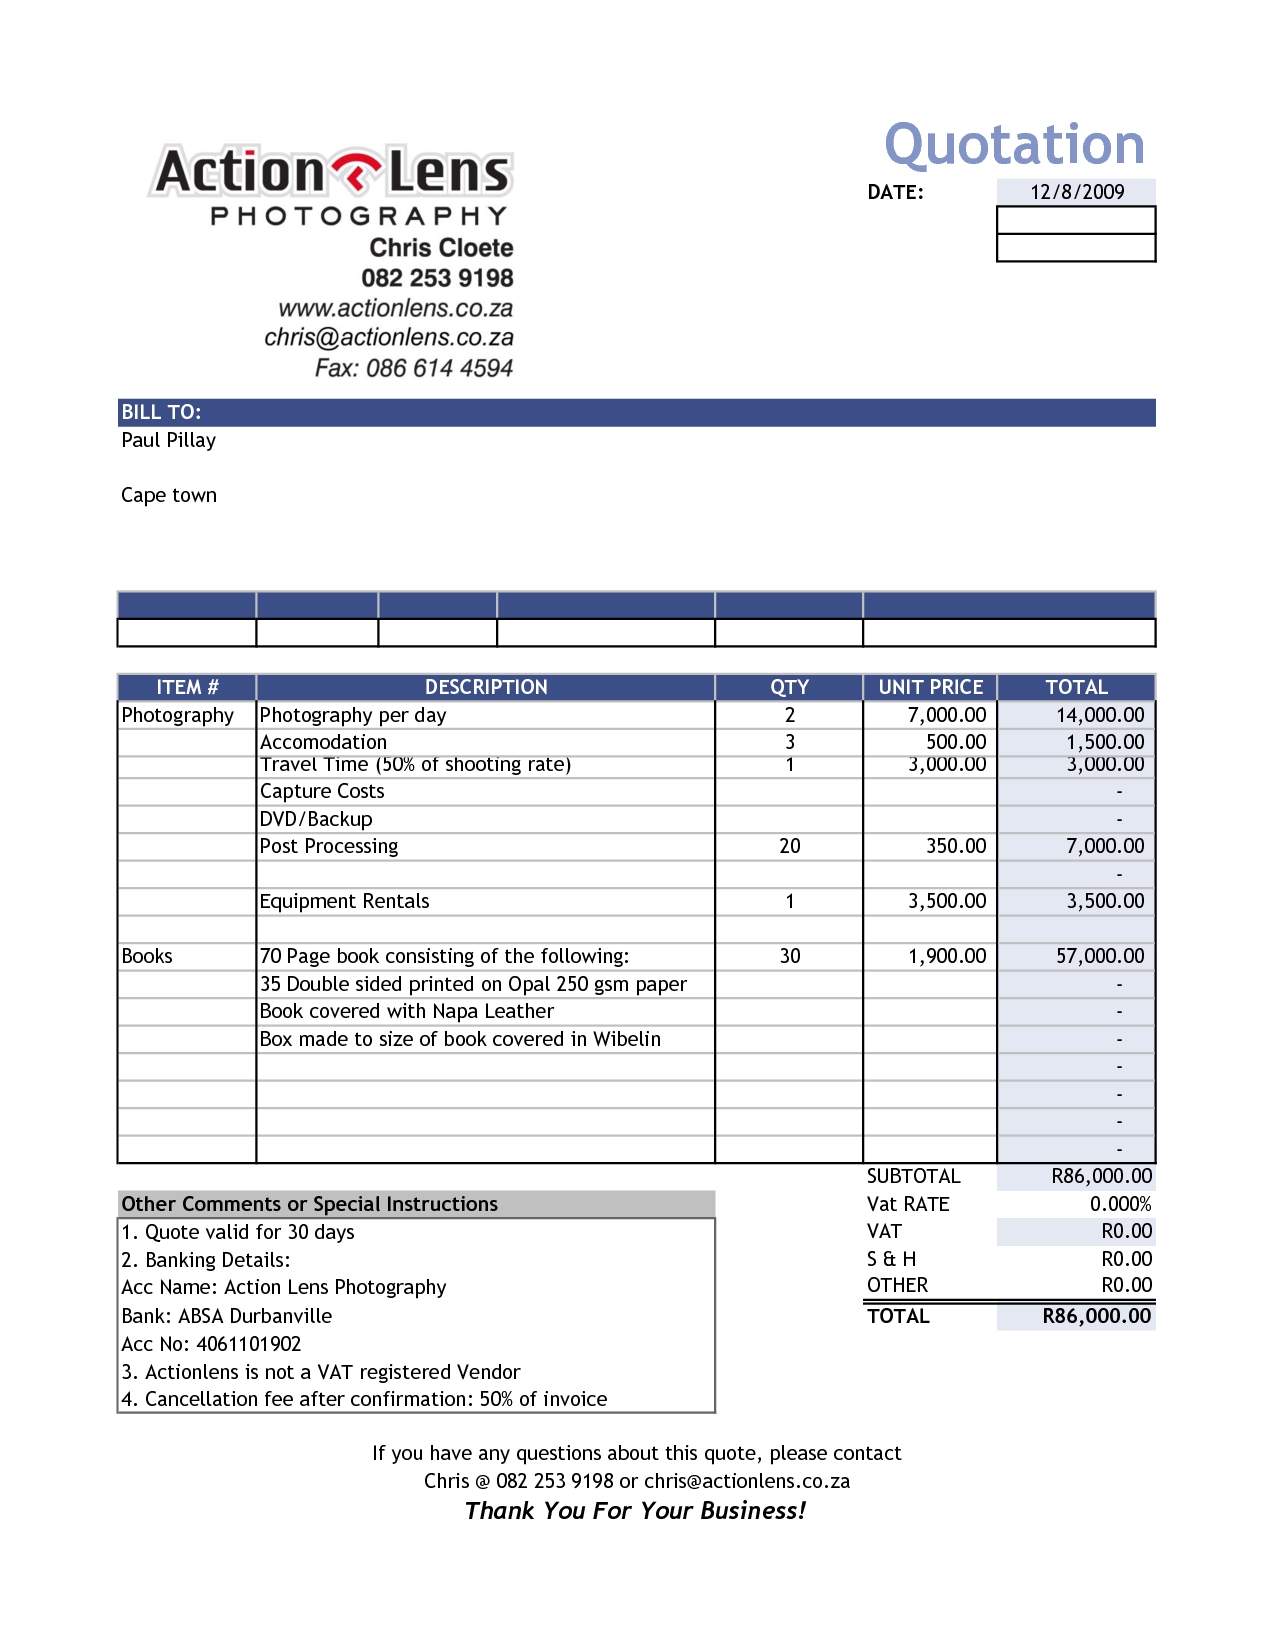 sales invoice template invoice templat free sale invoice forms sales invoice example